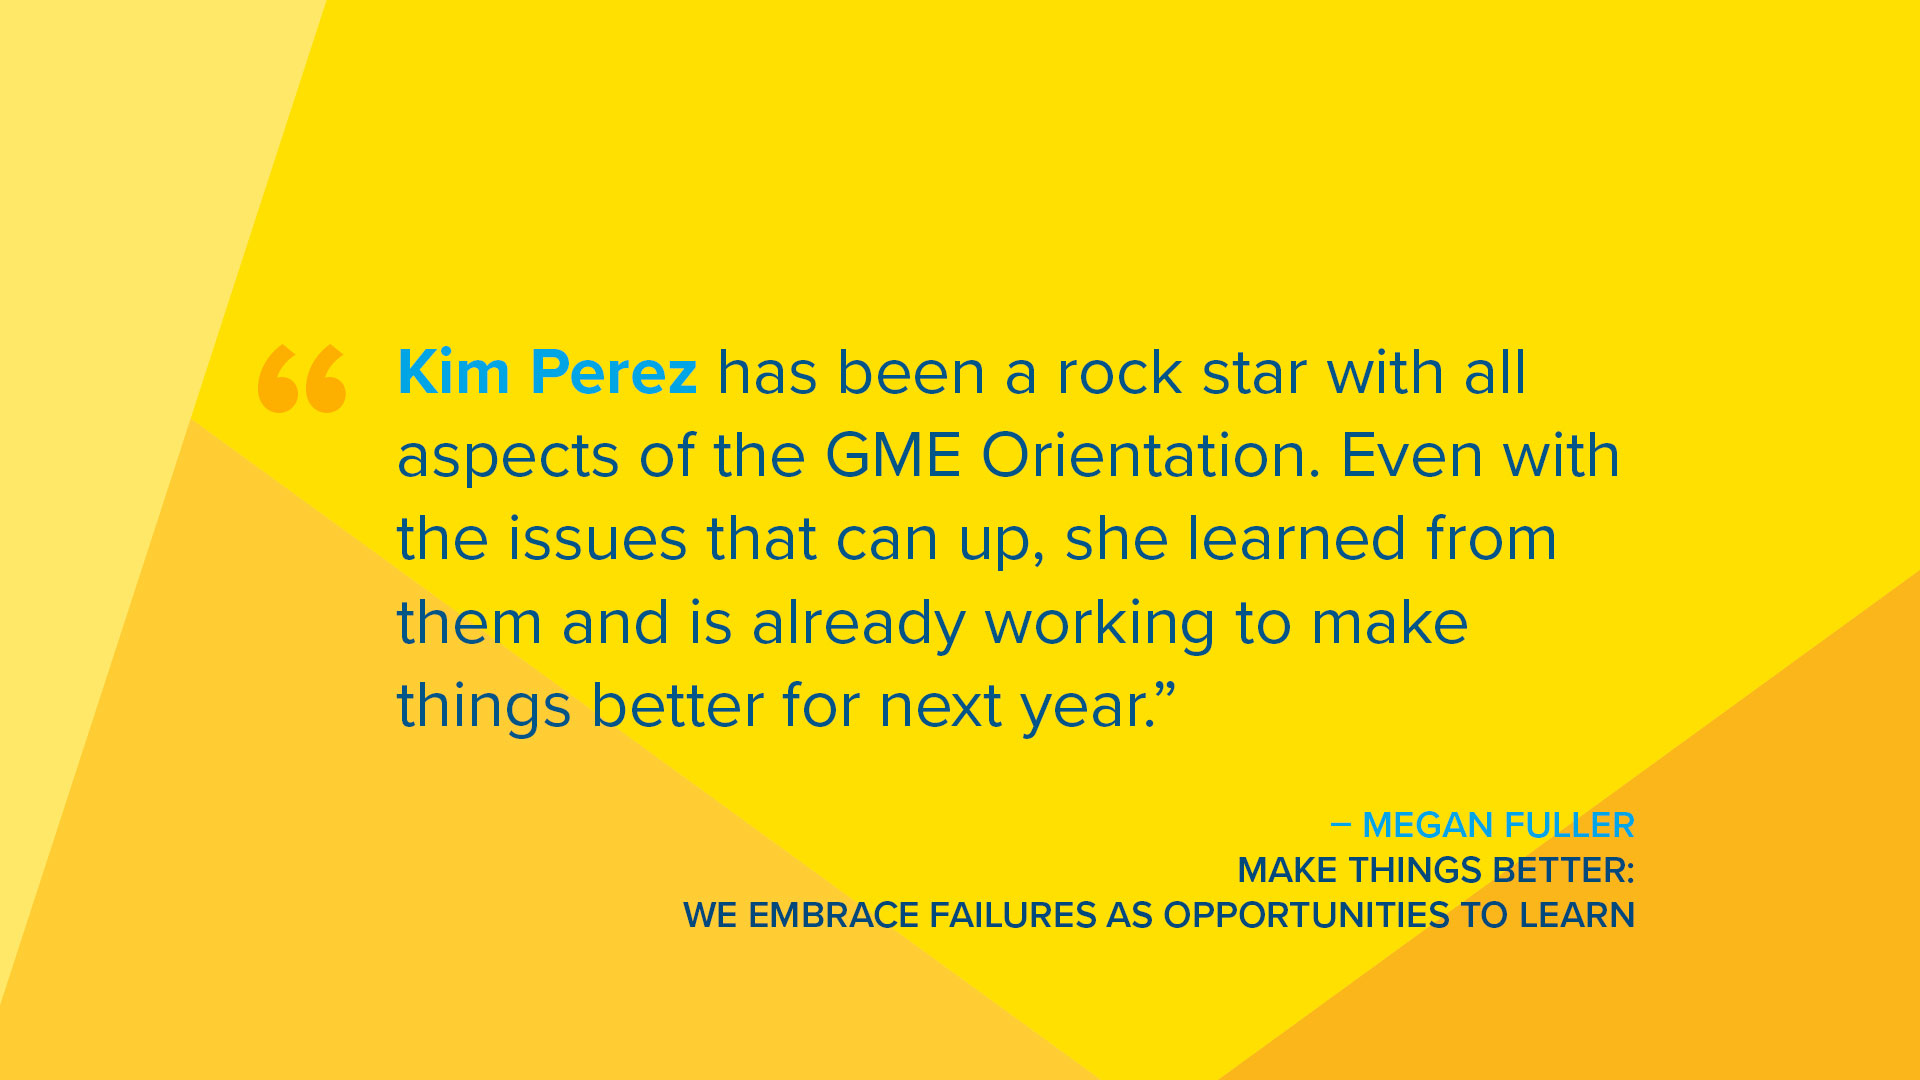 Kim Perez has been a rock star with all aspects of the GME Orientation. Even with the issues that can come up, she learned from them and is already working to make things better for next year.